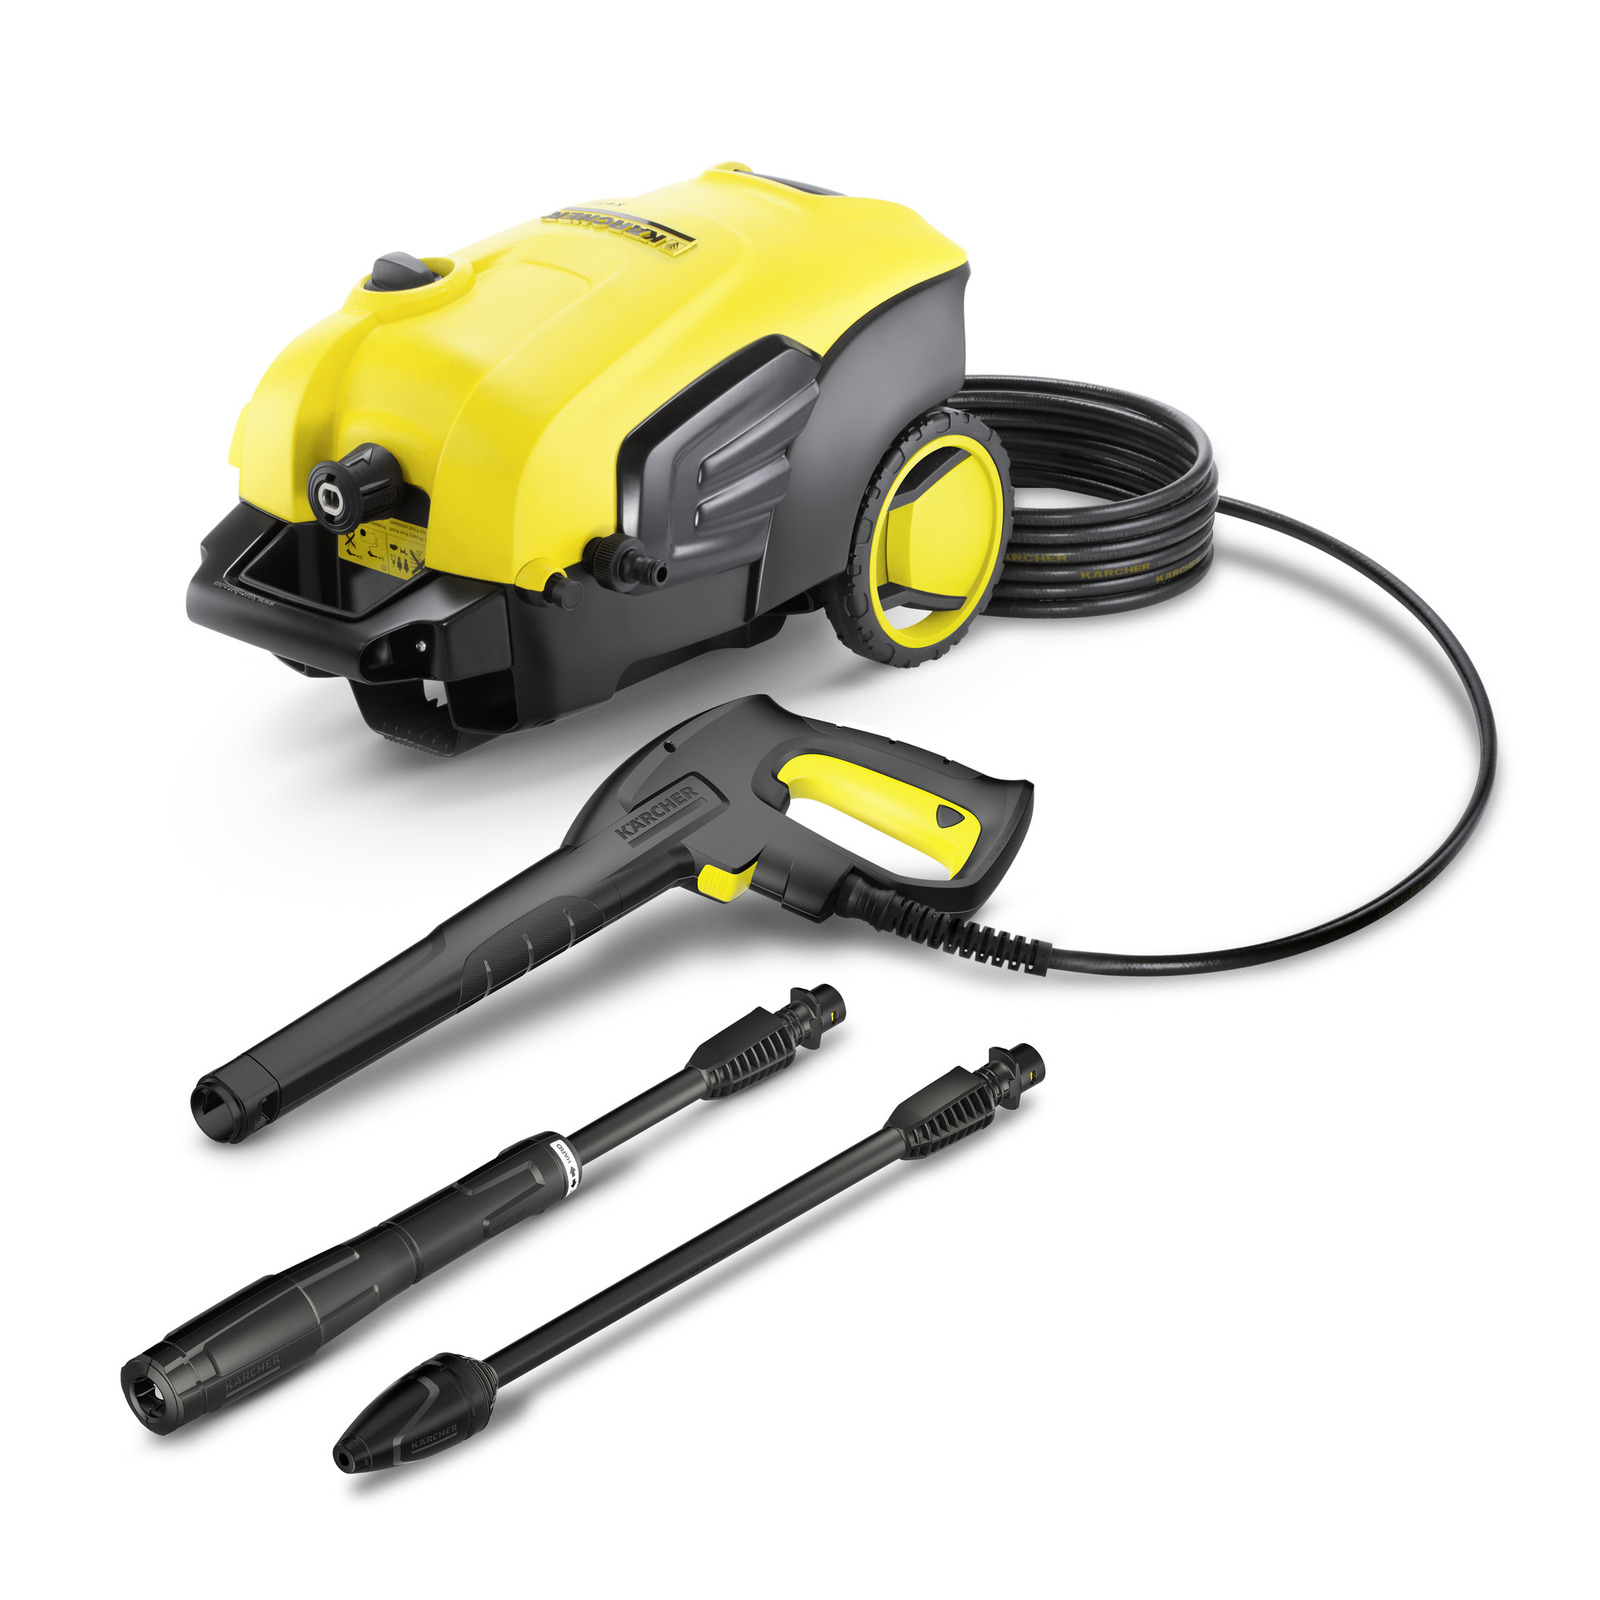 Karcher K 5 Compact High Pressure Washer Direct Cleaning Solutions